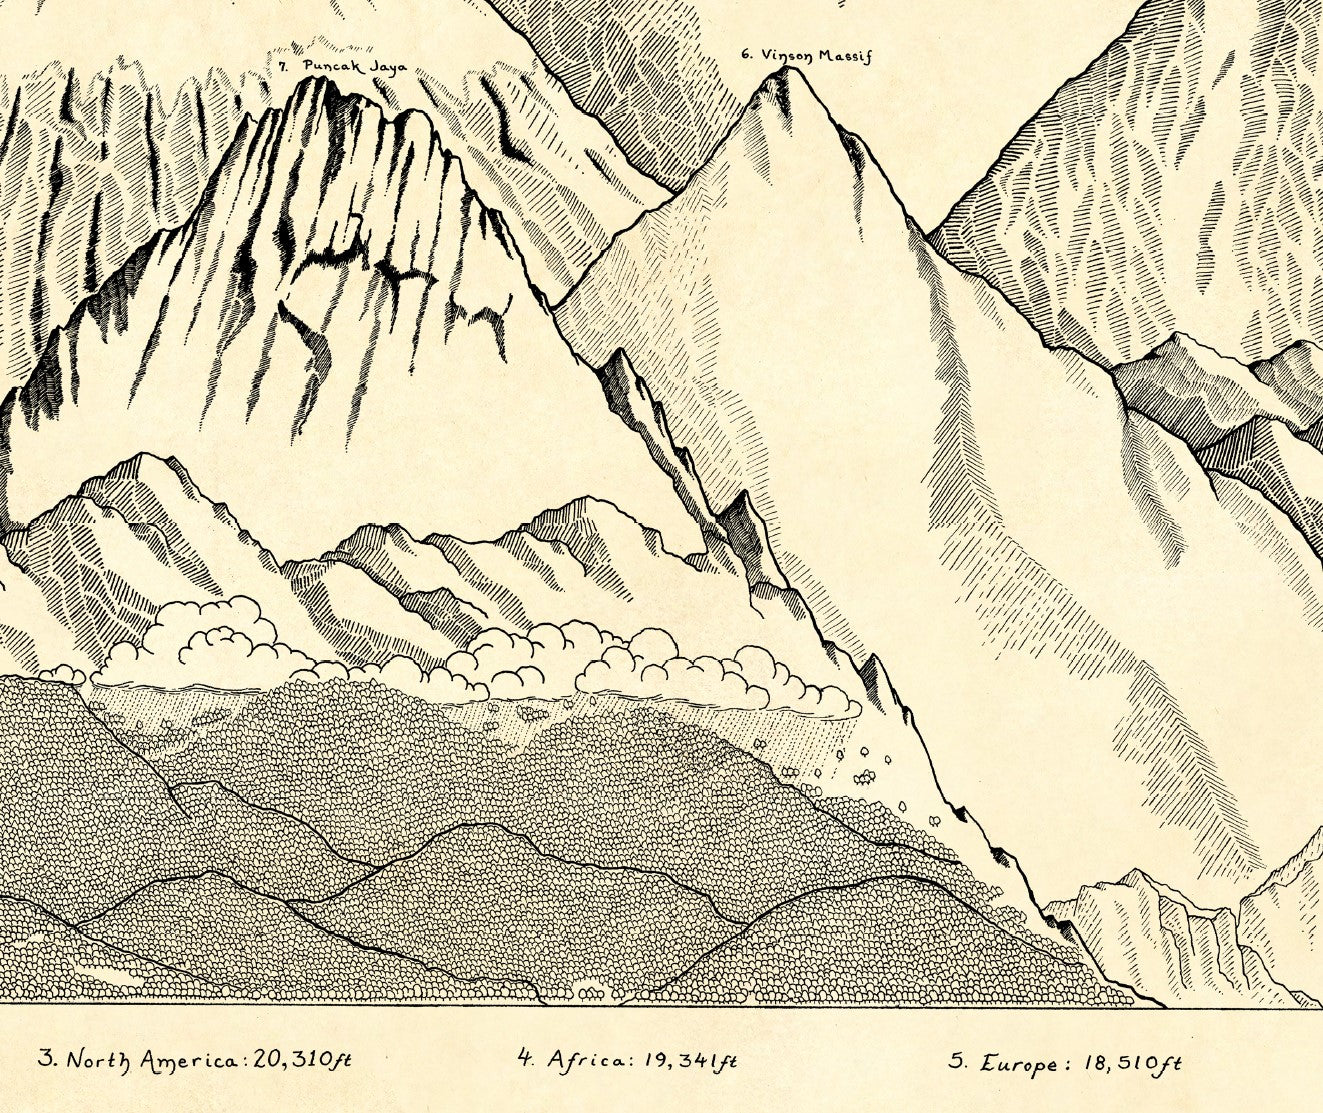 The Seven Summits Map